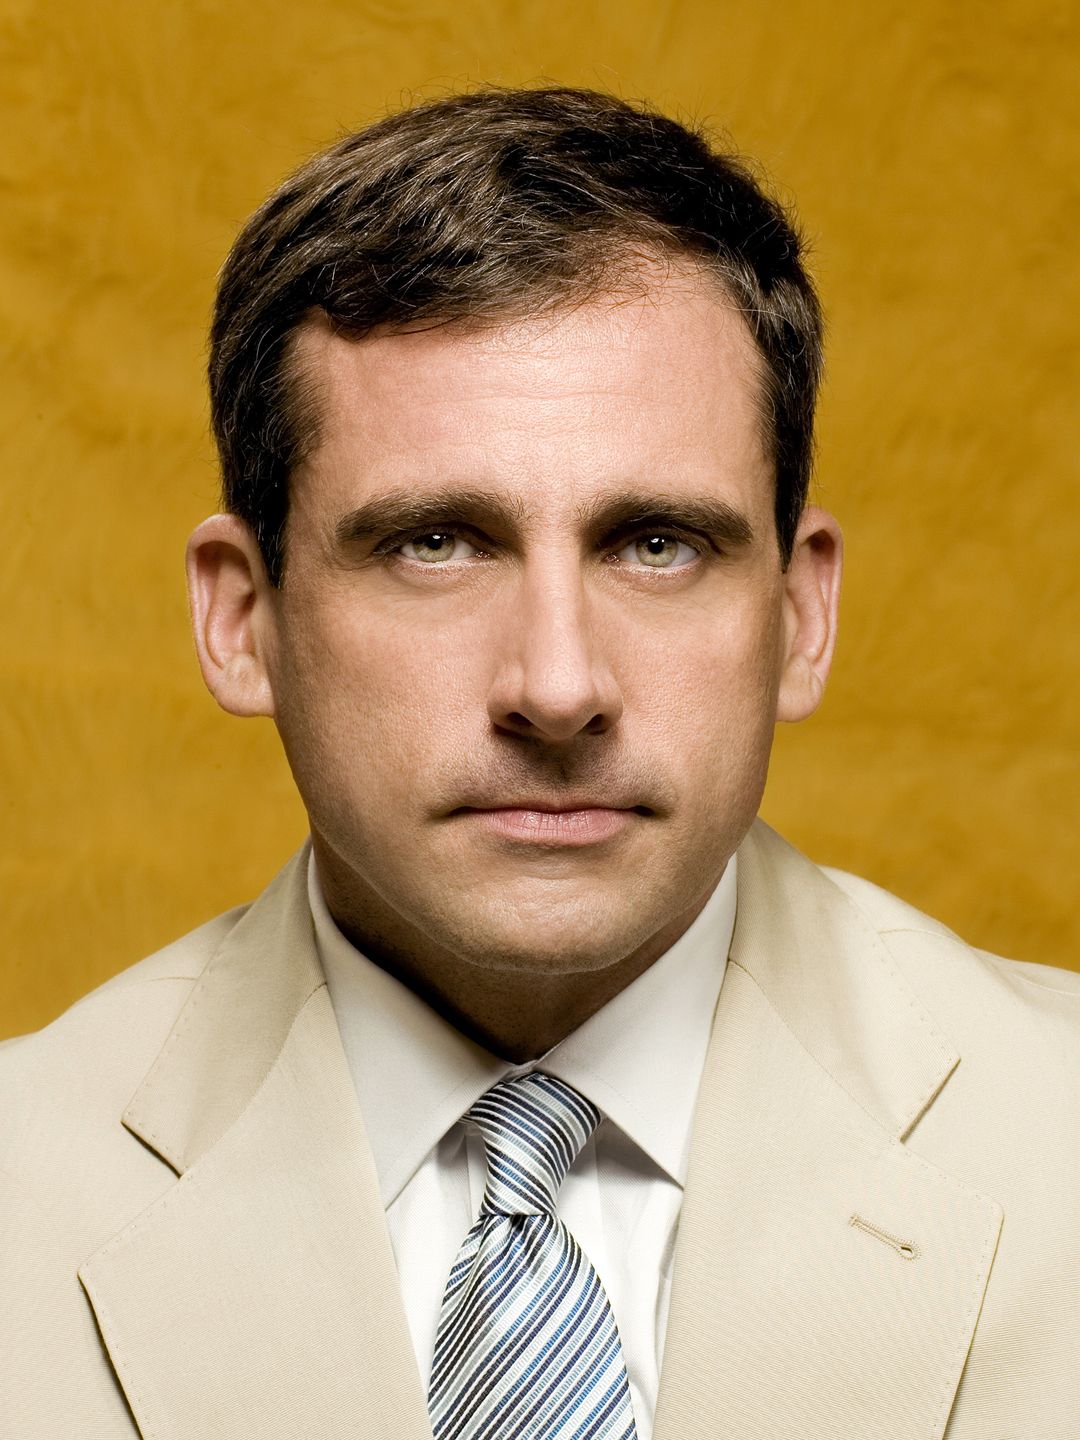 Steve Carell how did he became famous